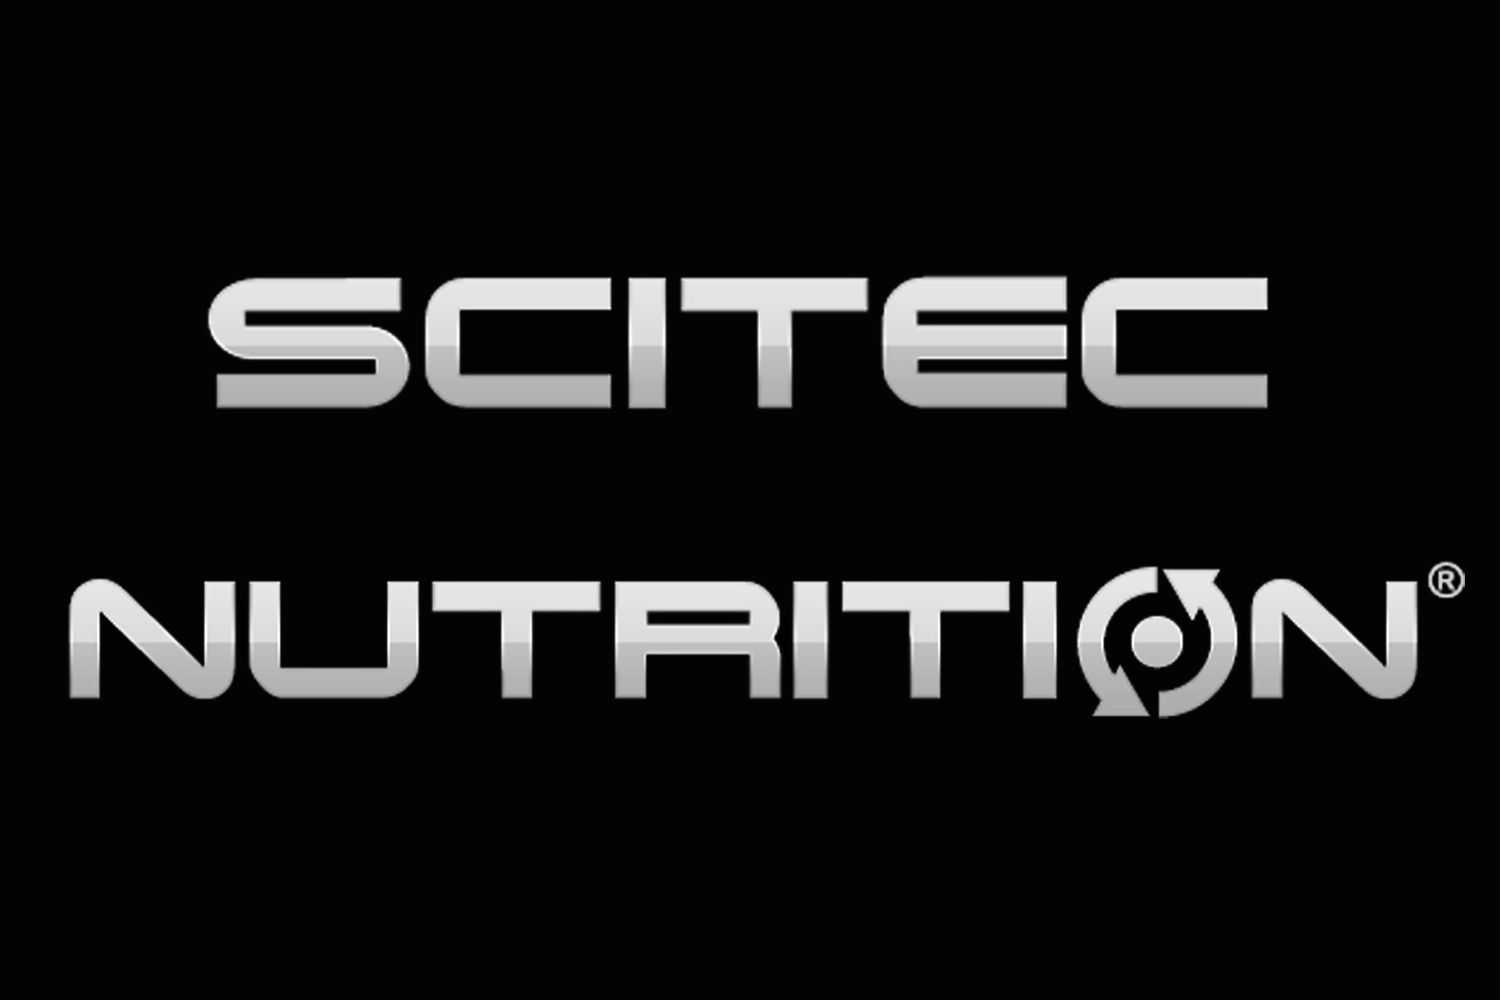 New York Fitness - Scitec Nutrition Products